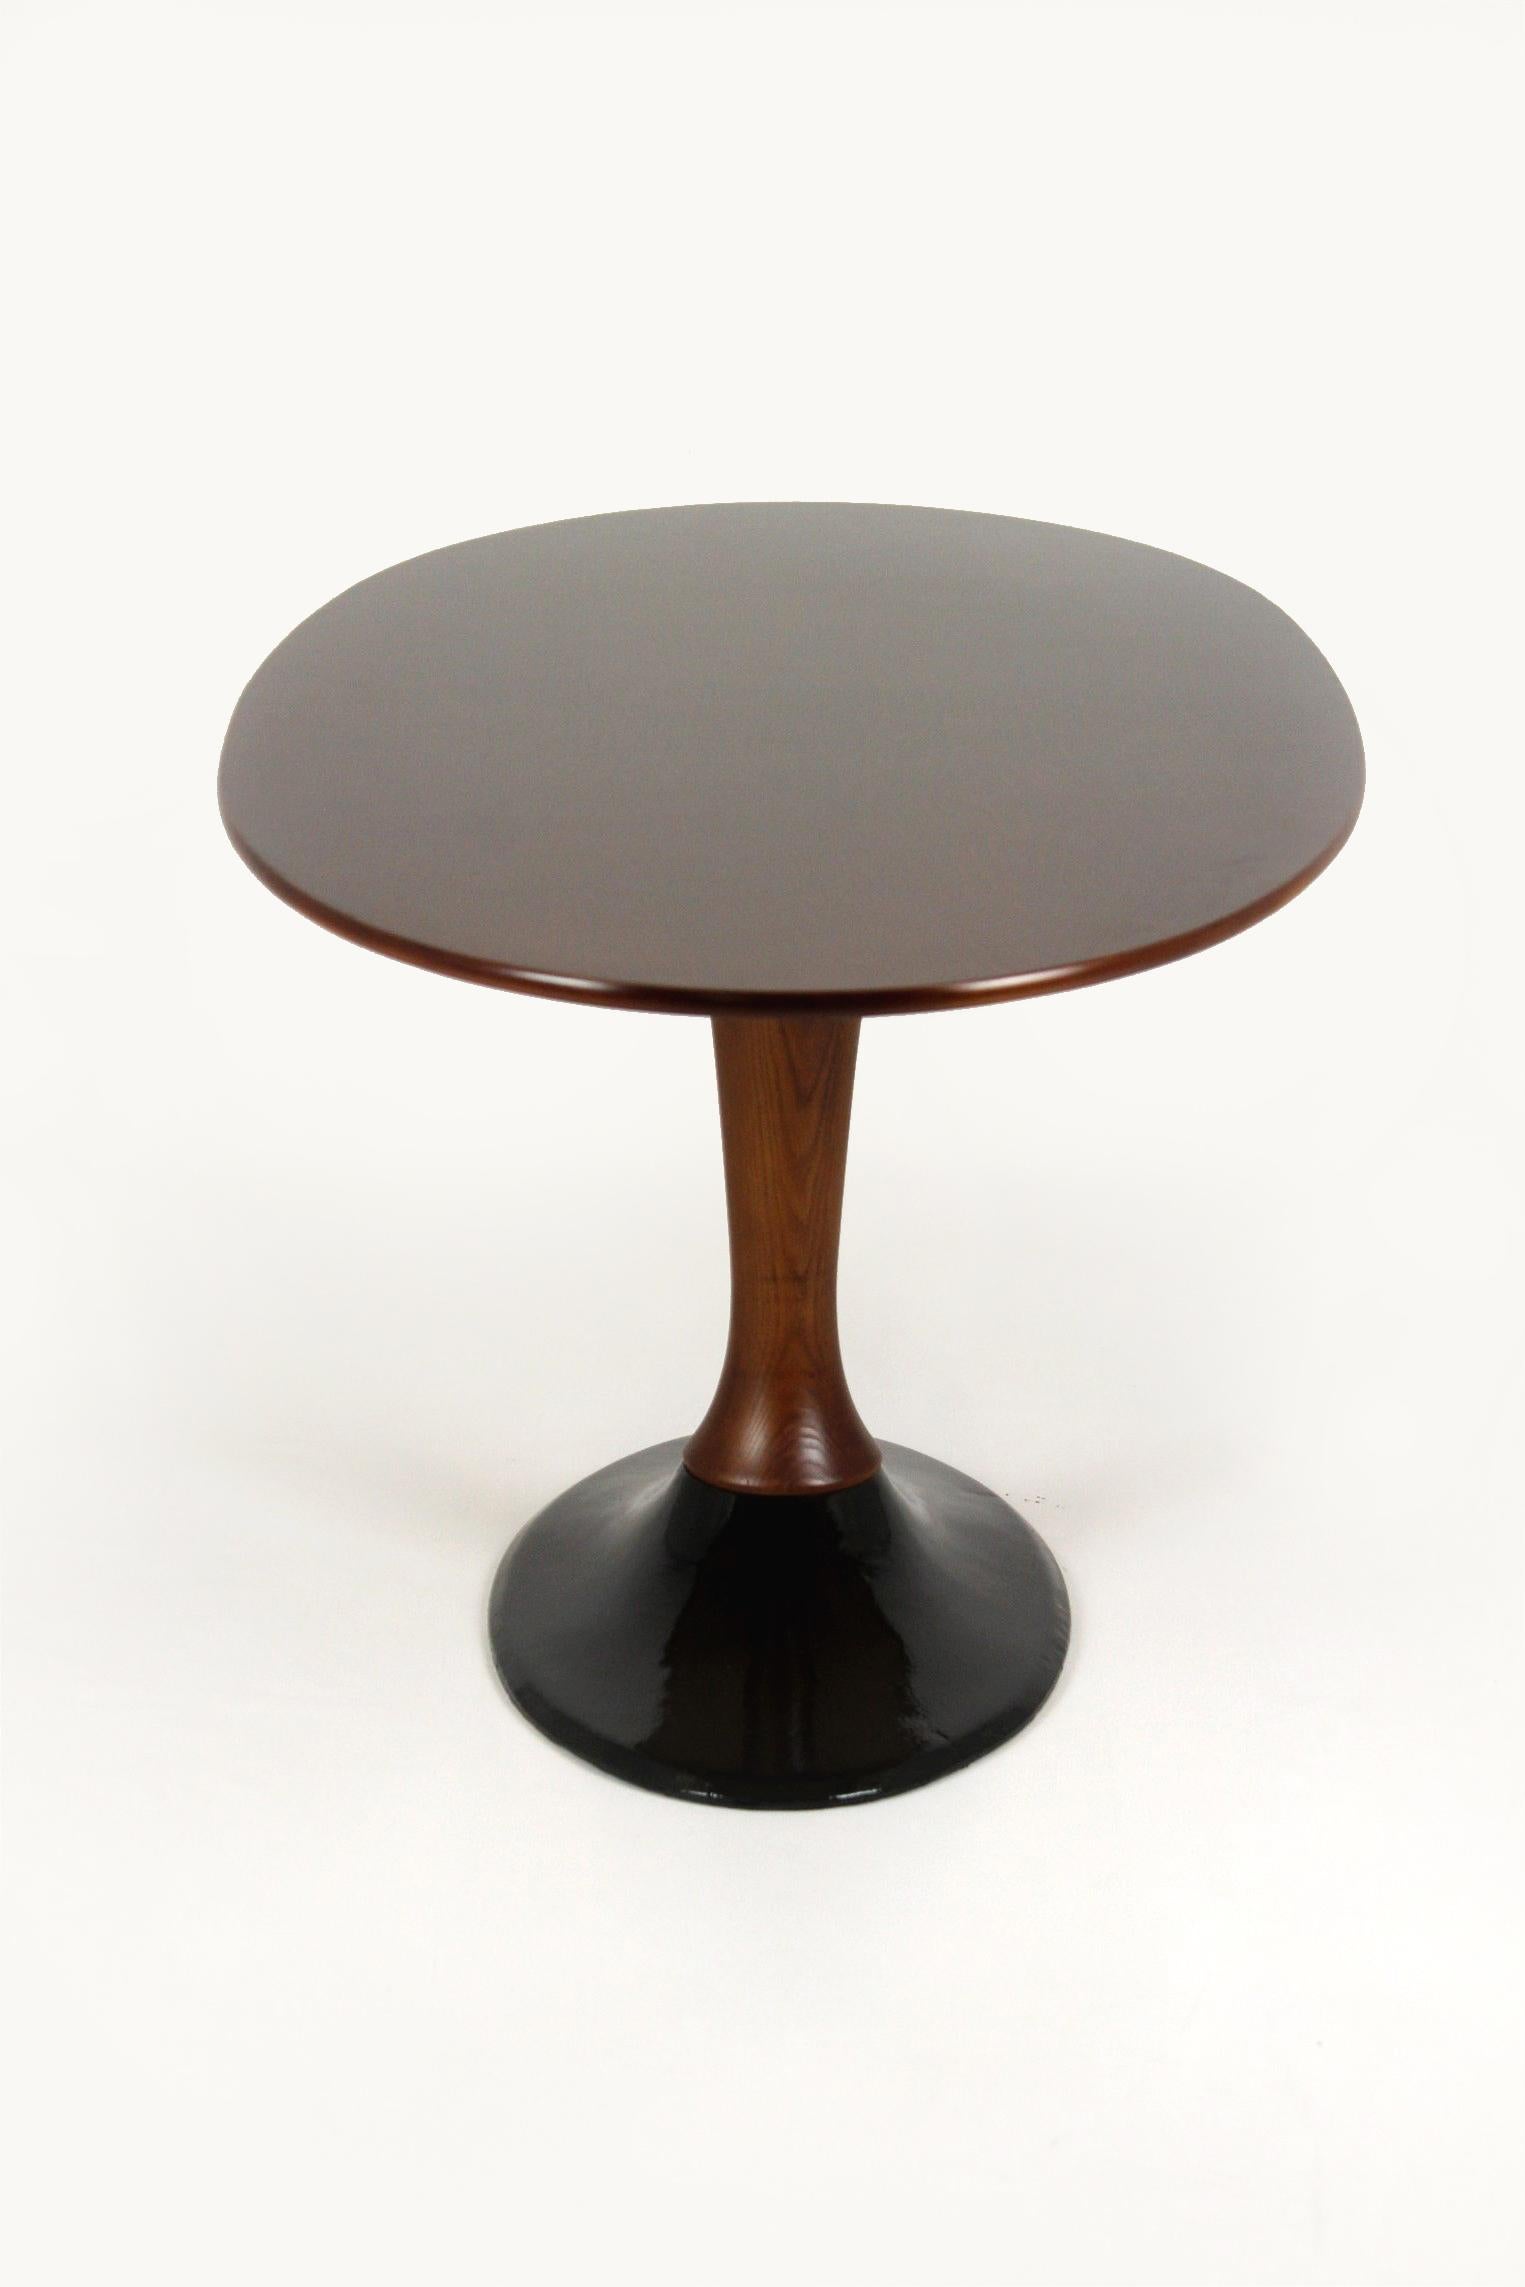 20th Century Restored Mid-Century Modern Oval Ash Coffee Table from Drevotvar, 1960s For Sale